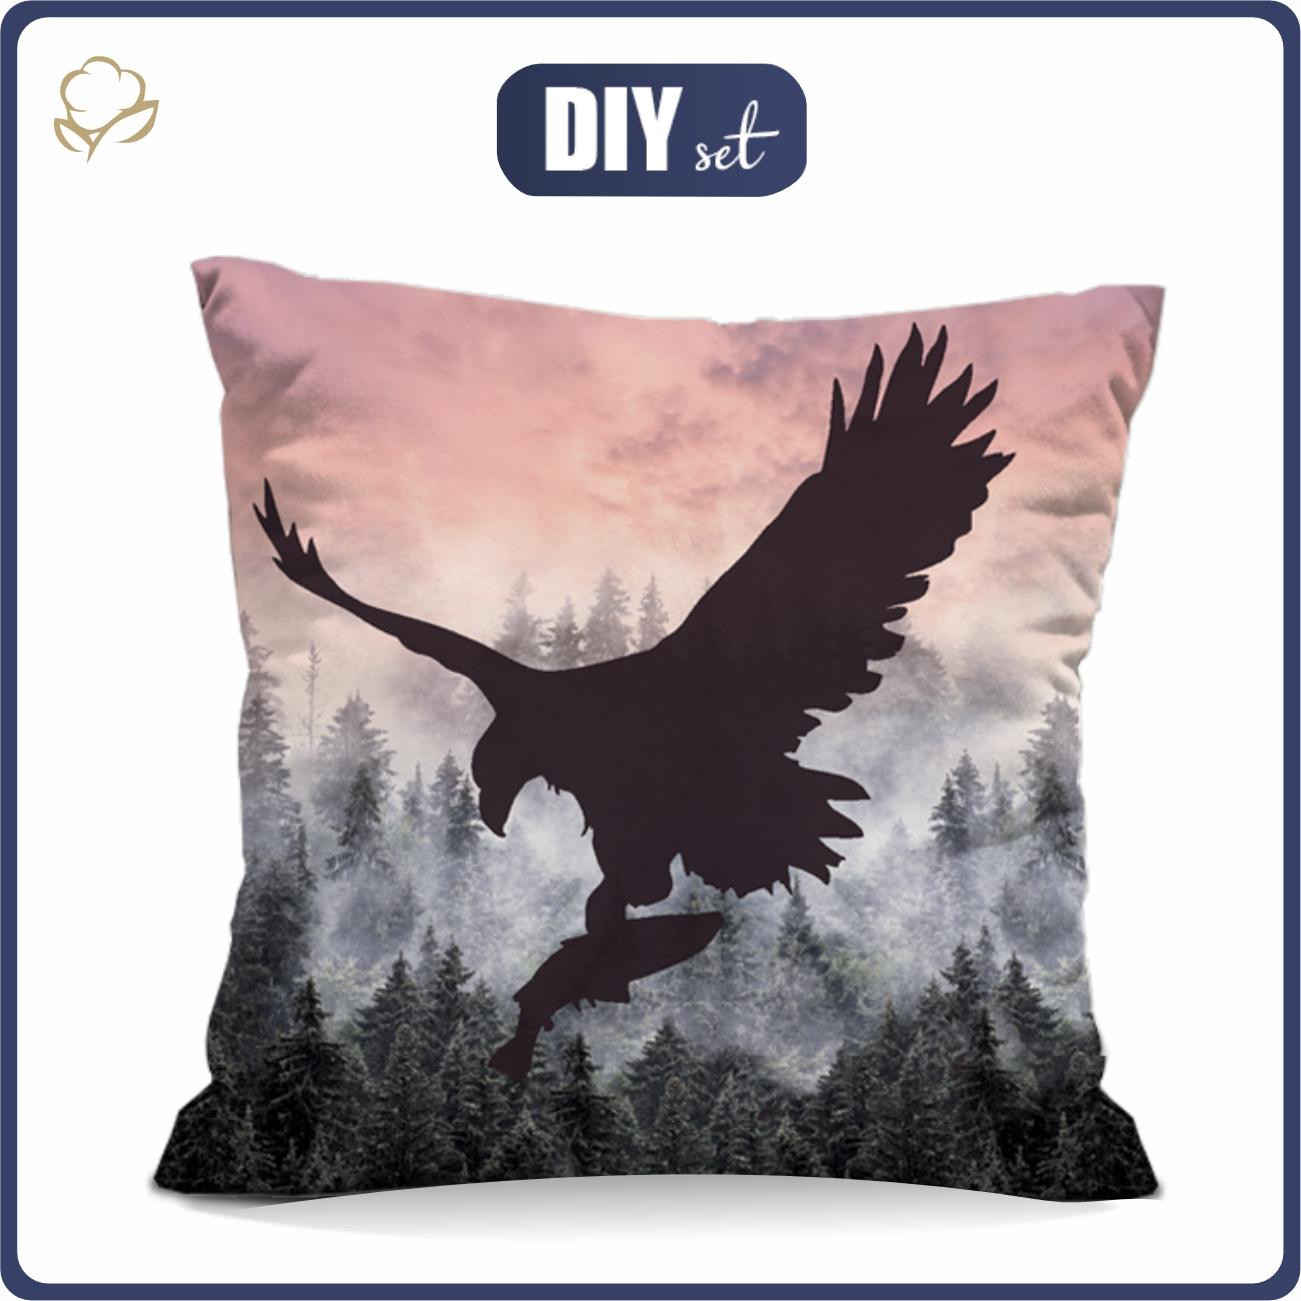 PILLOW 45X45 - EAGLE AND MOUNTAINS - sewing set